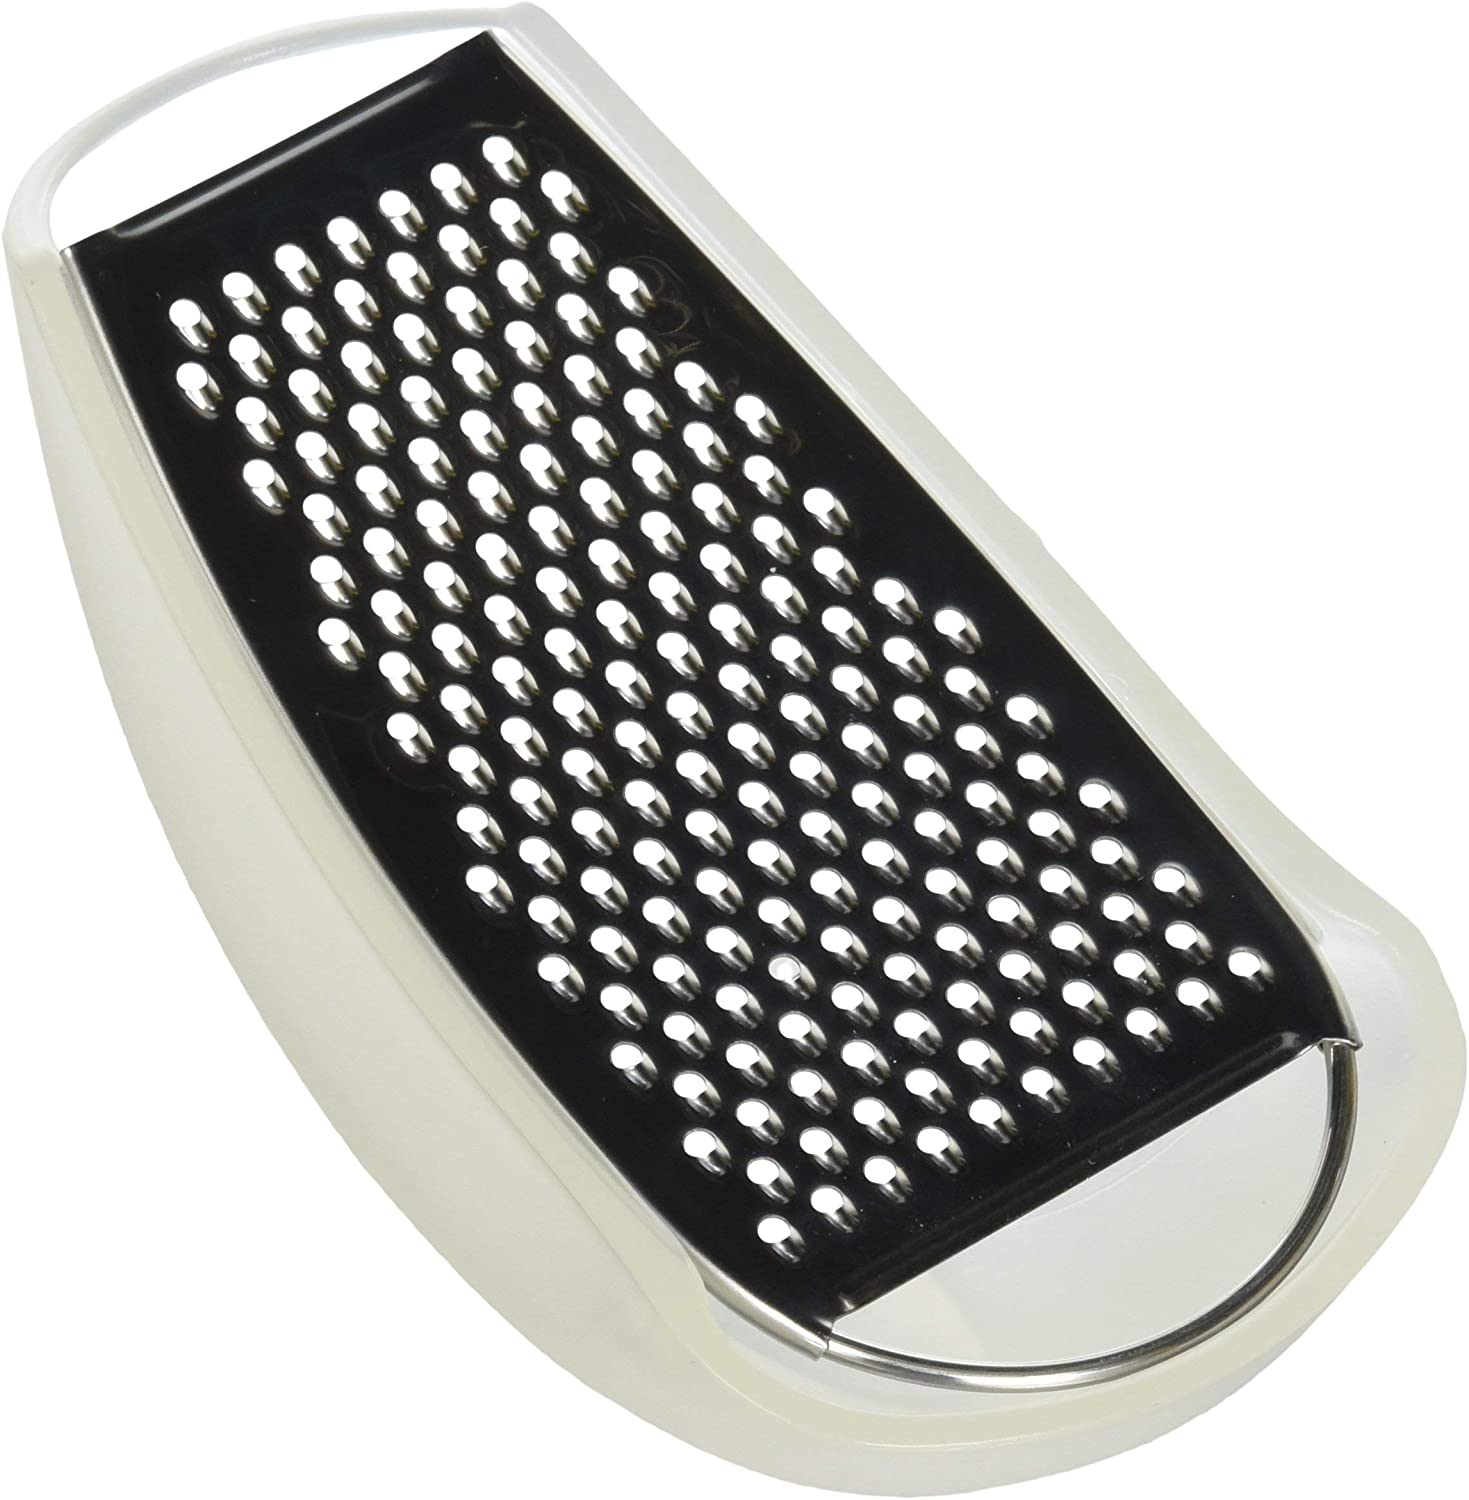 Italian Cheese Graters with Cellar